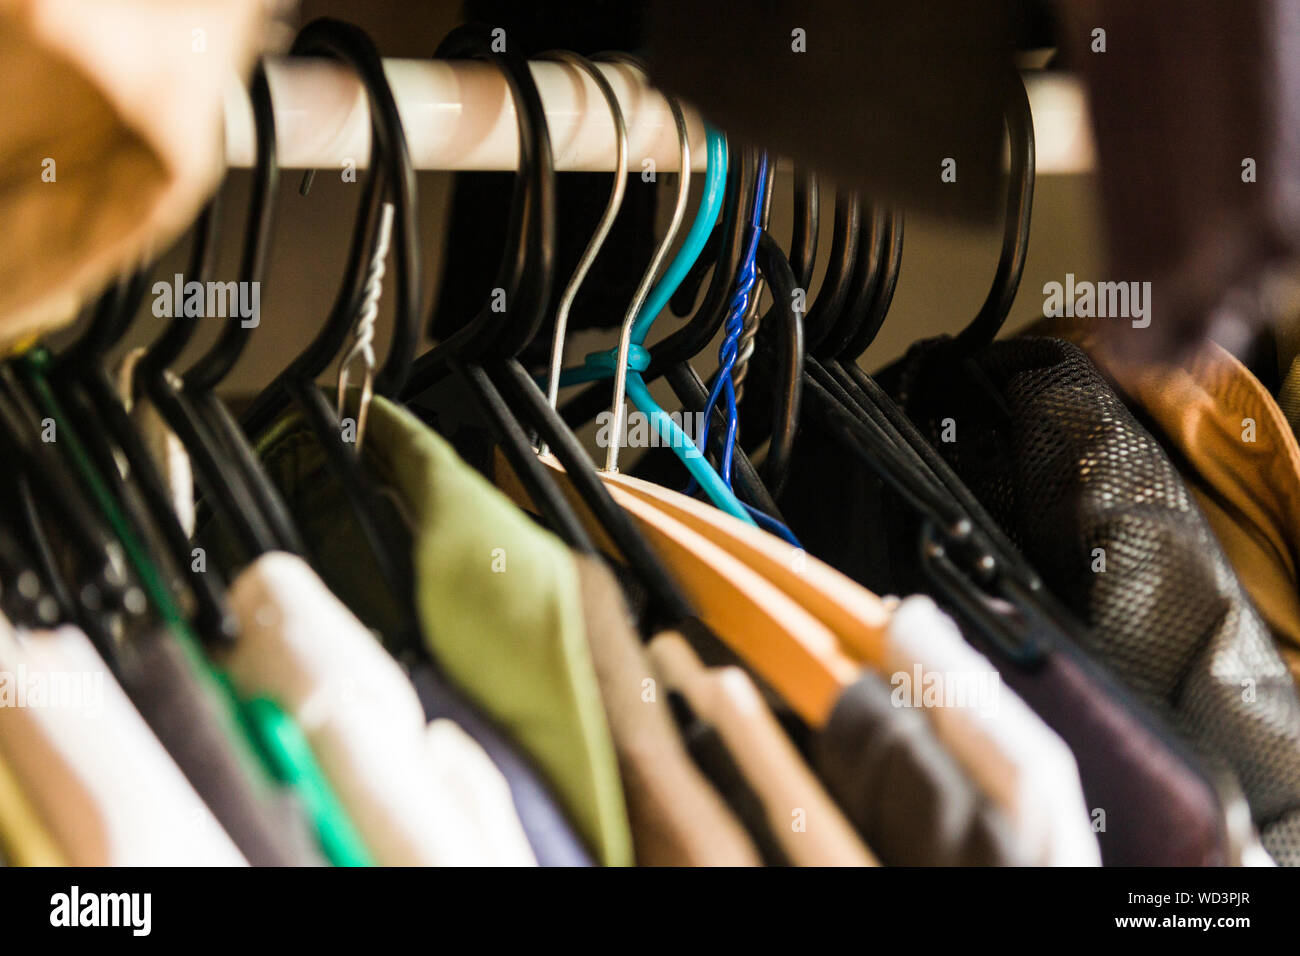 Semi organised clothes hanging in wardrobe. Stock Photo